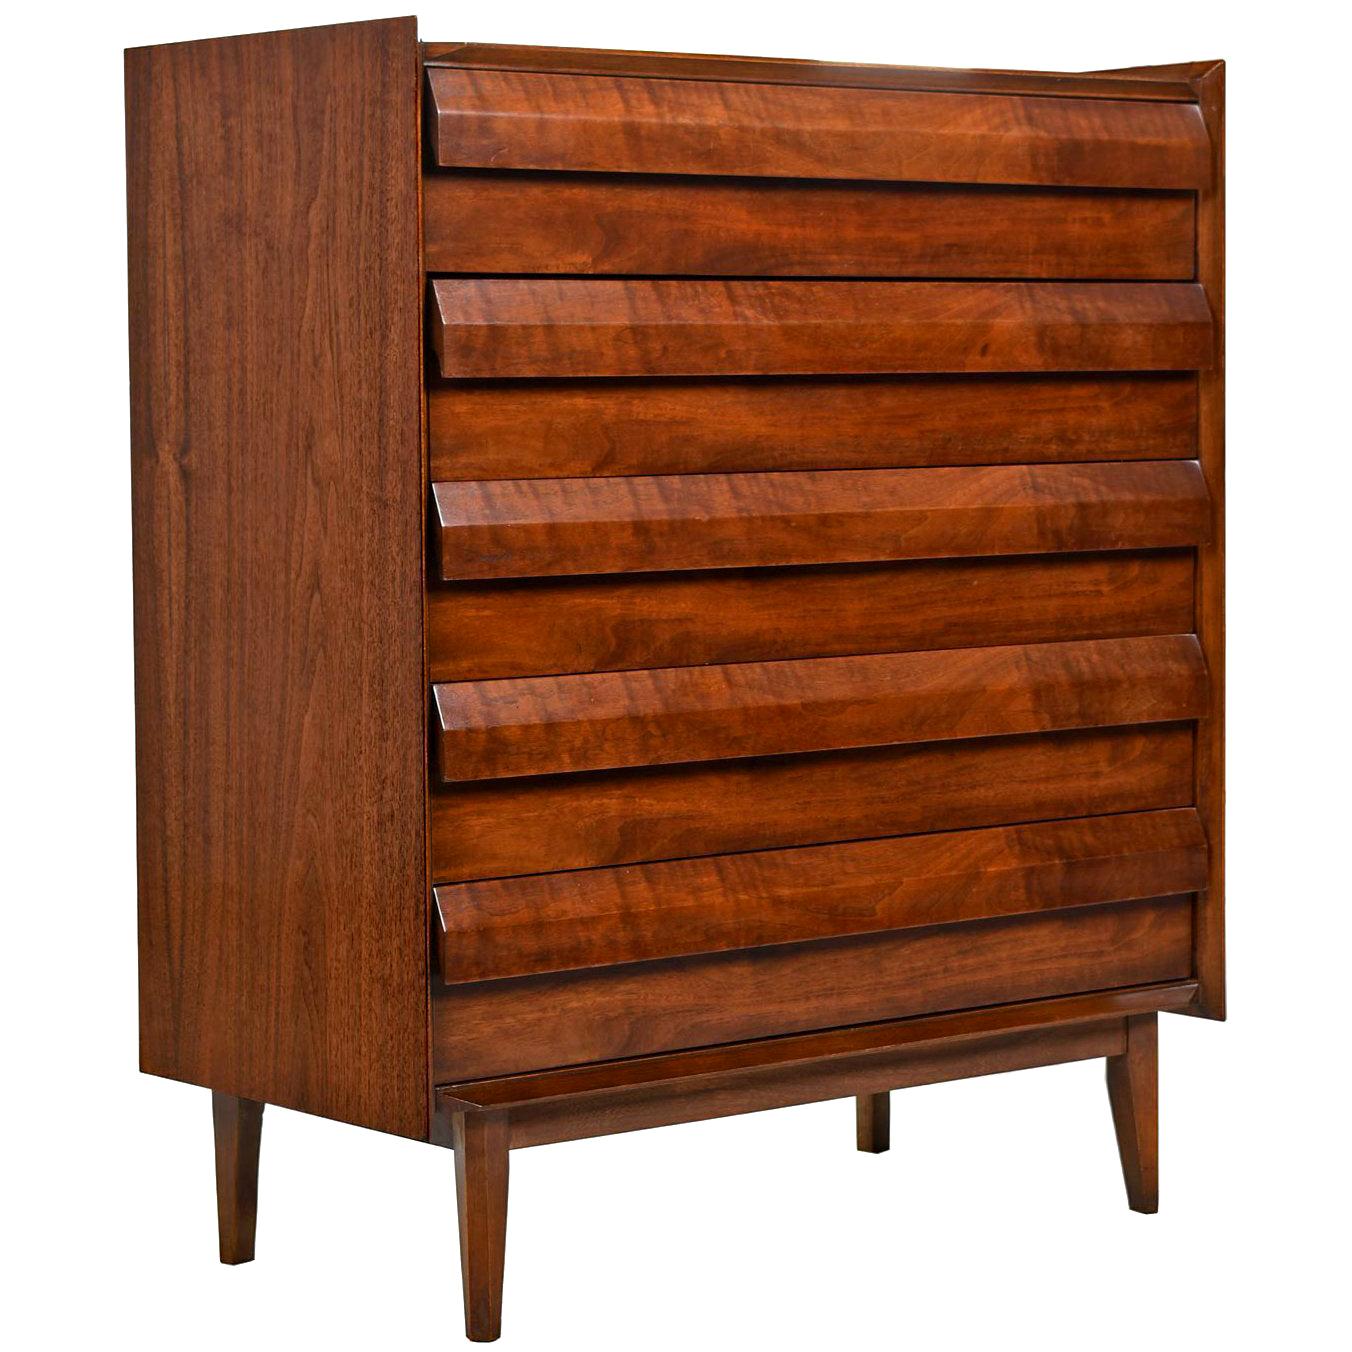 Stunning highboy dresser with louvered drawer fronts. This is a masterpiece of American, 20th century design, an absolutely beautiful example of Mid-Century Modern craftsmanship by Lane Furniture. Minimalist design with no hardware. Sharp, sleek and